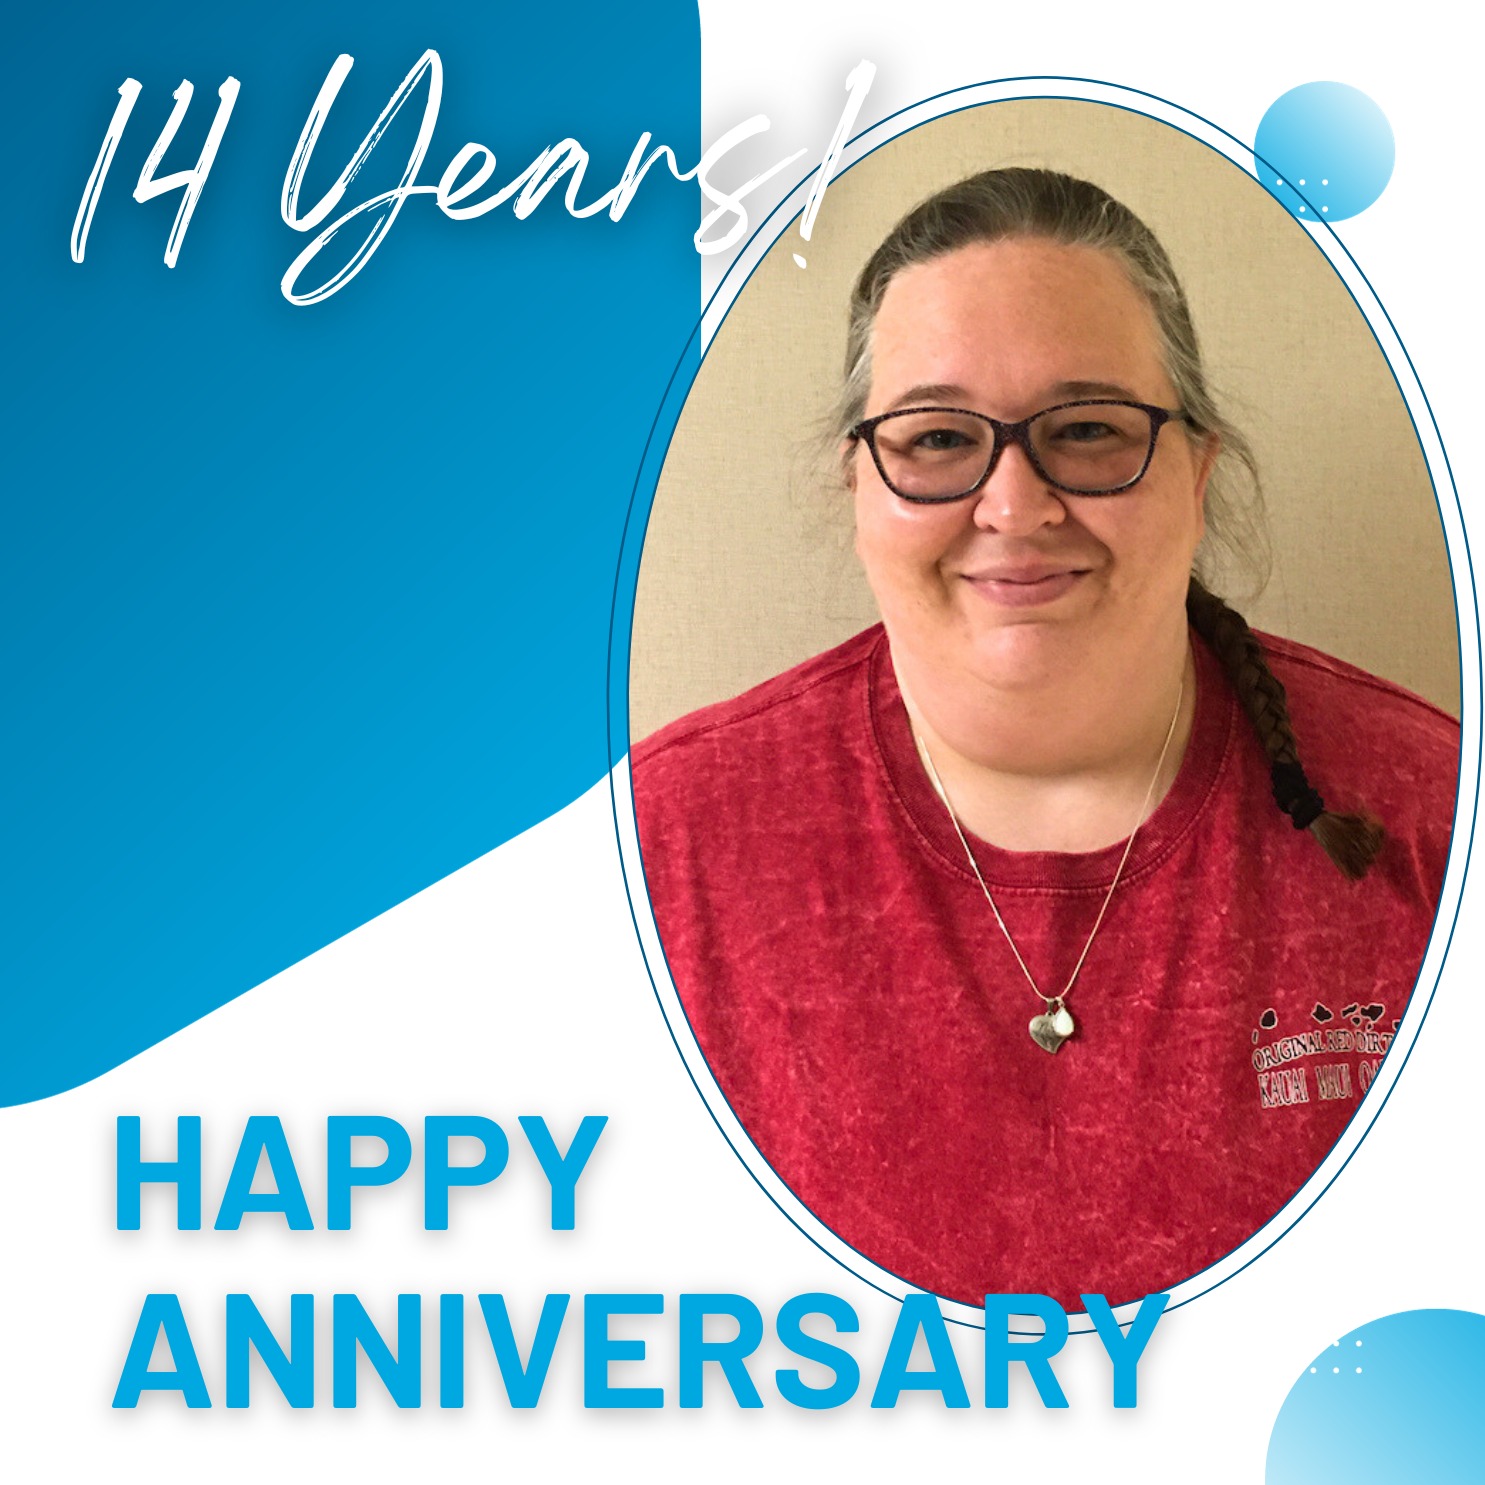 🎉🌟 Cheers to 14 Years of Culinary Excellence! 🌟🎉 Congratulations to Joyel Peden, our incredible Certified Dietary Manager, on reaching this impressive work anniversary milestone. Joyel's dedication to ensuring nutritious and delicious meals for our residents has been the heart of our dining experience.